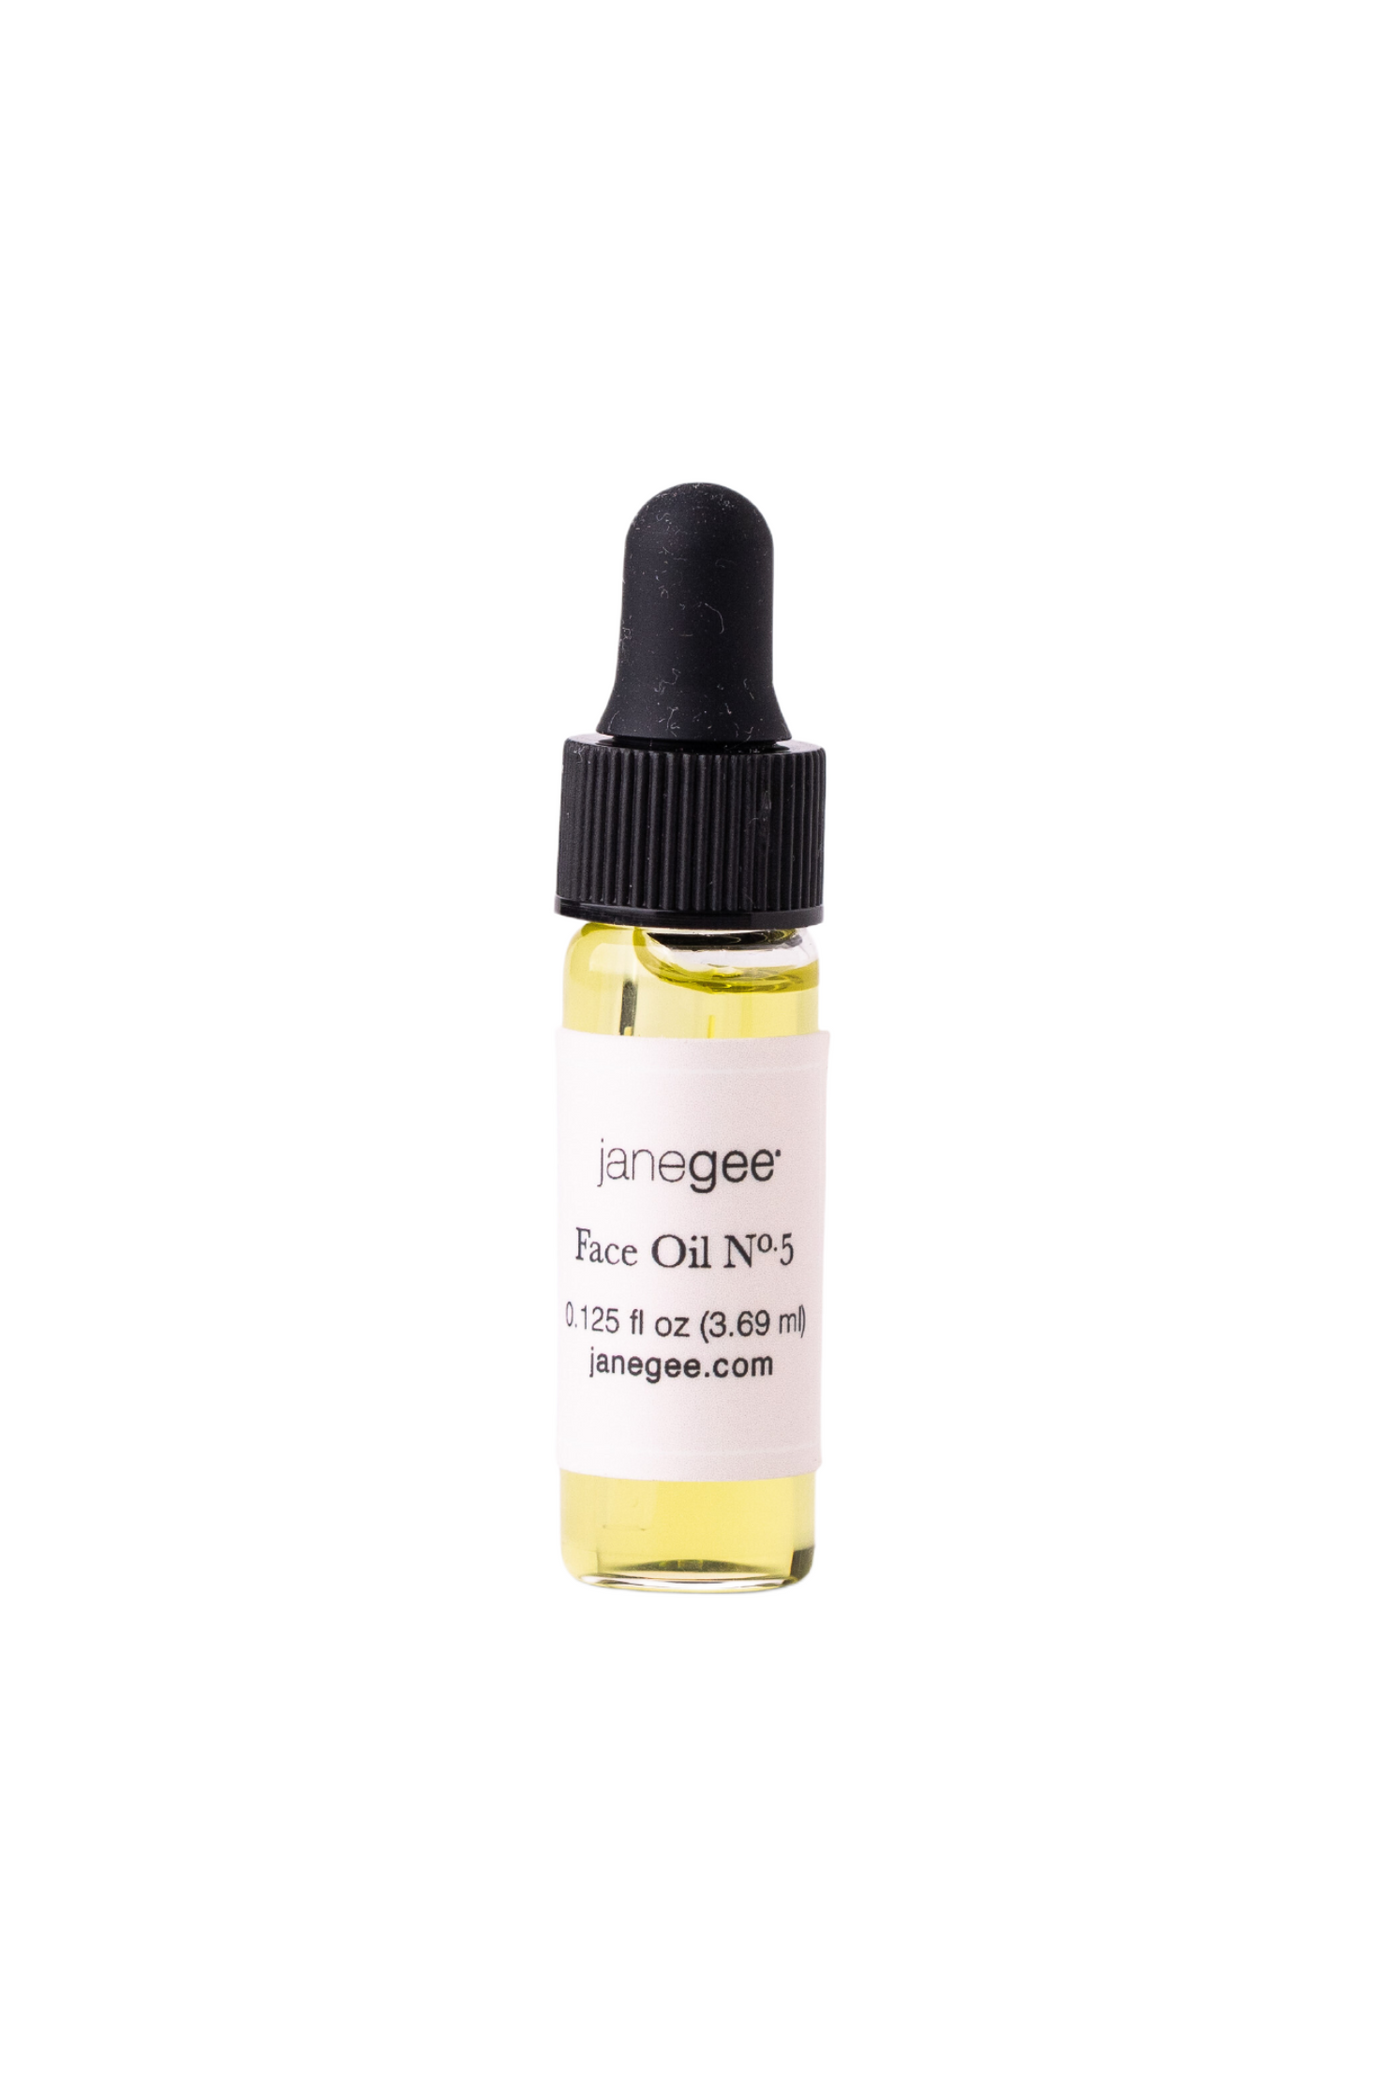 janegee Face Oil No.5 Sample